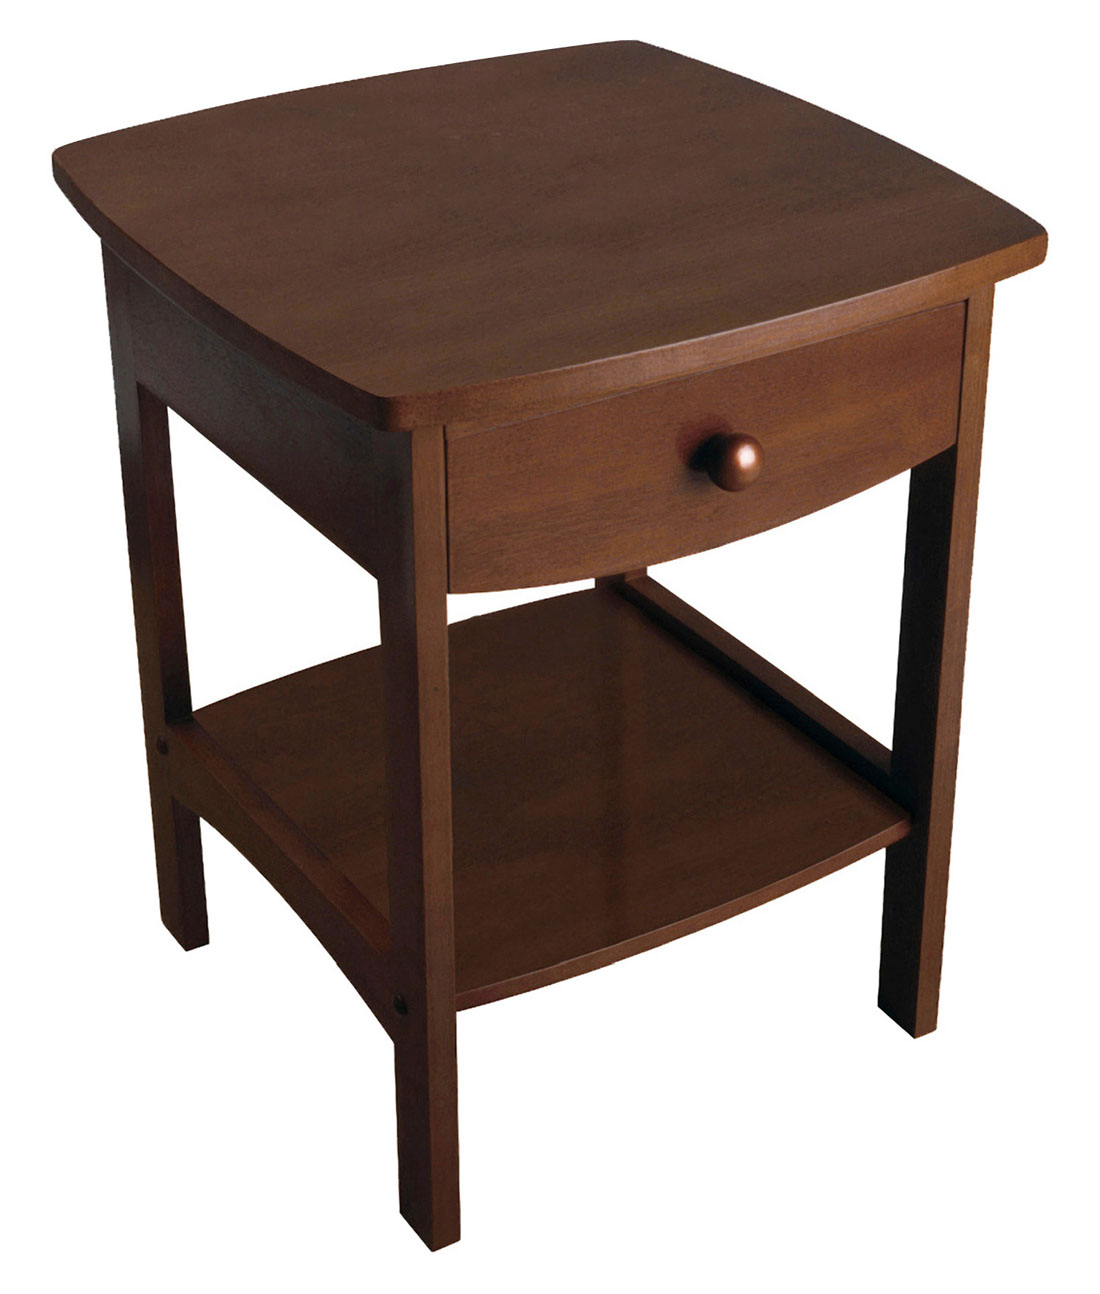 winsome wood claire accent table anitque walnut finish household sasha round corner garden and chairs clearance pier dining bench pottery barn toscana side with drawer ikea wall